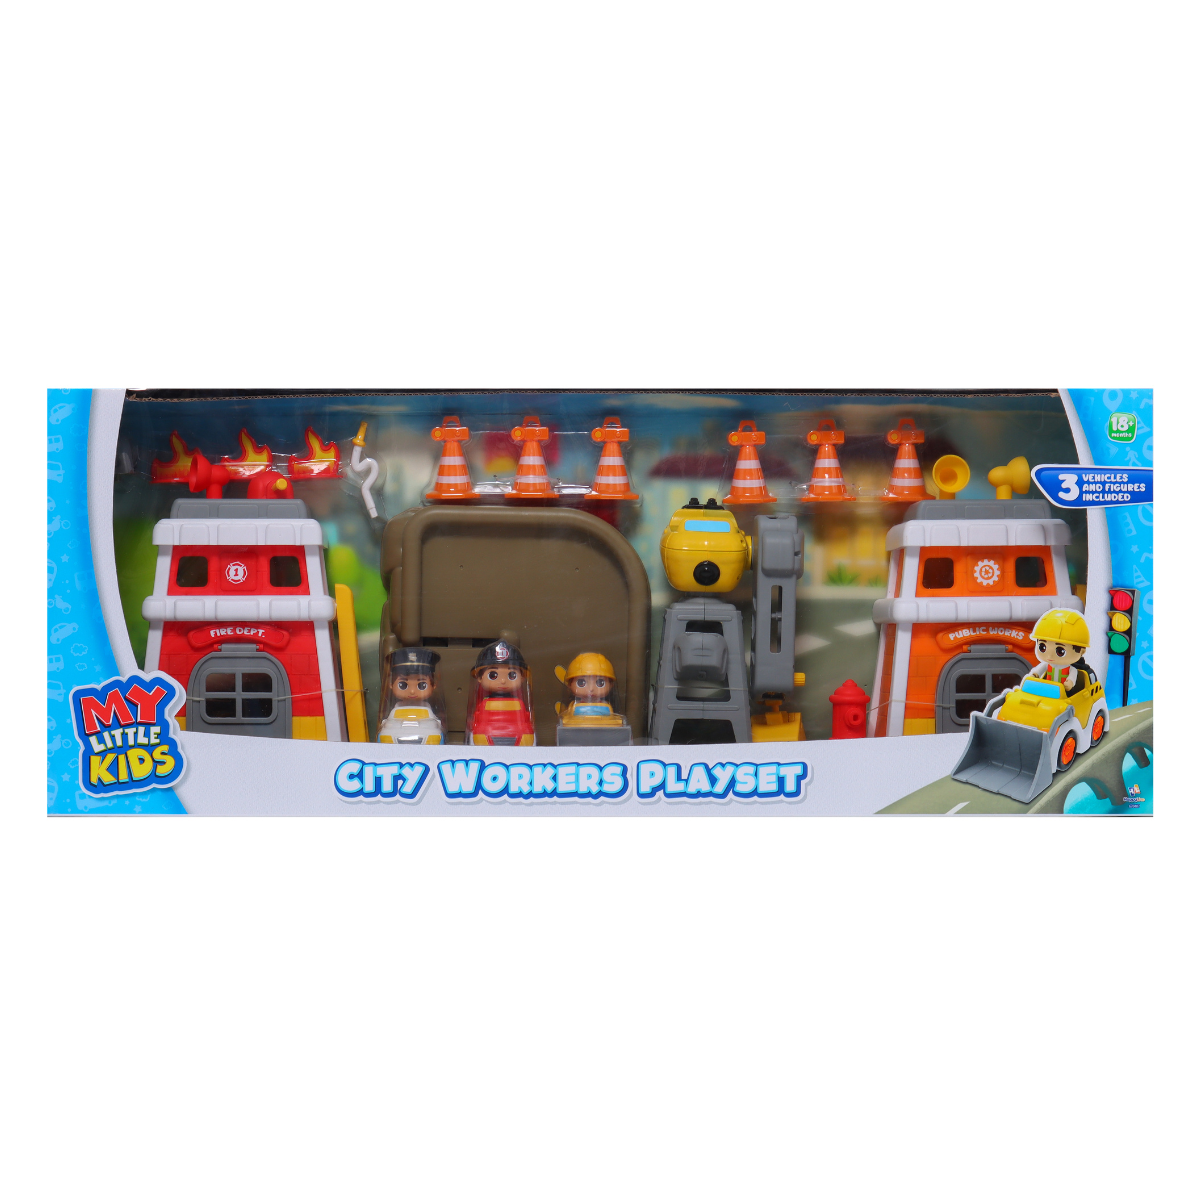 City Workers Playset